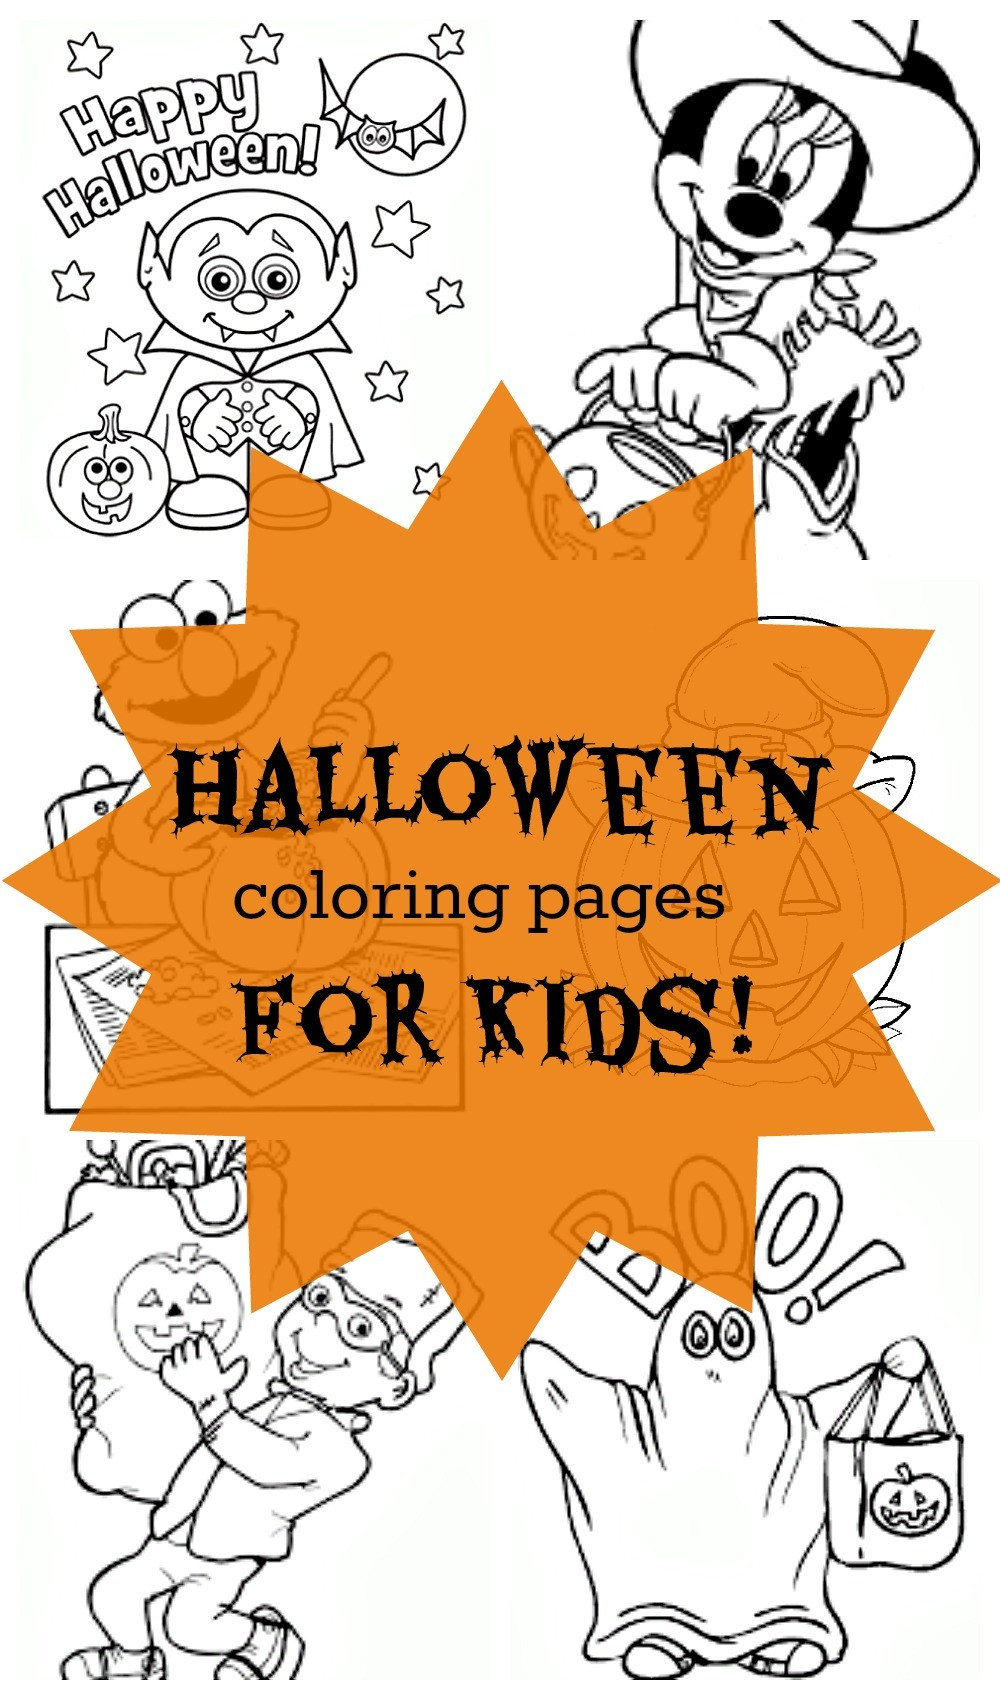 Halloween Coloring Books For Kids
 24 Free Printable Halloween Coloring Pages for Kids